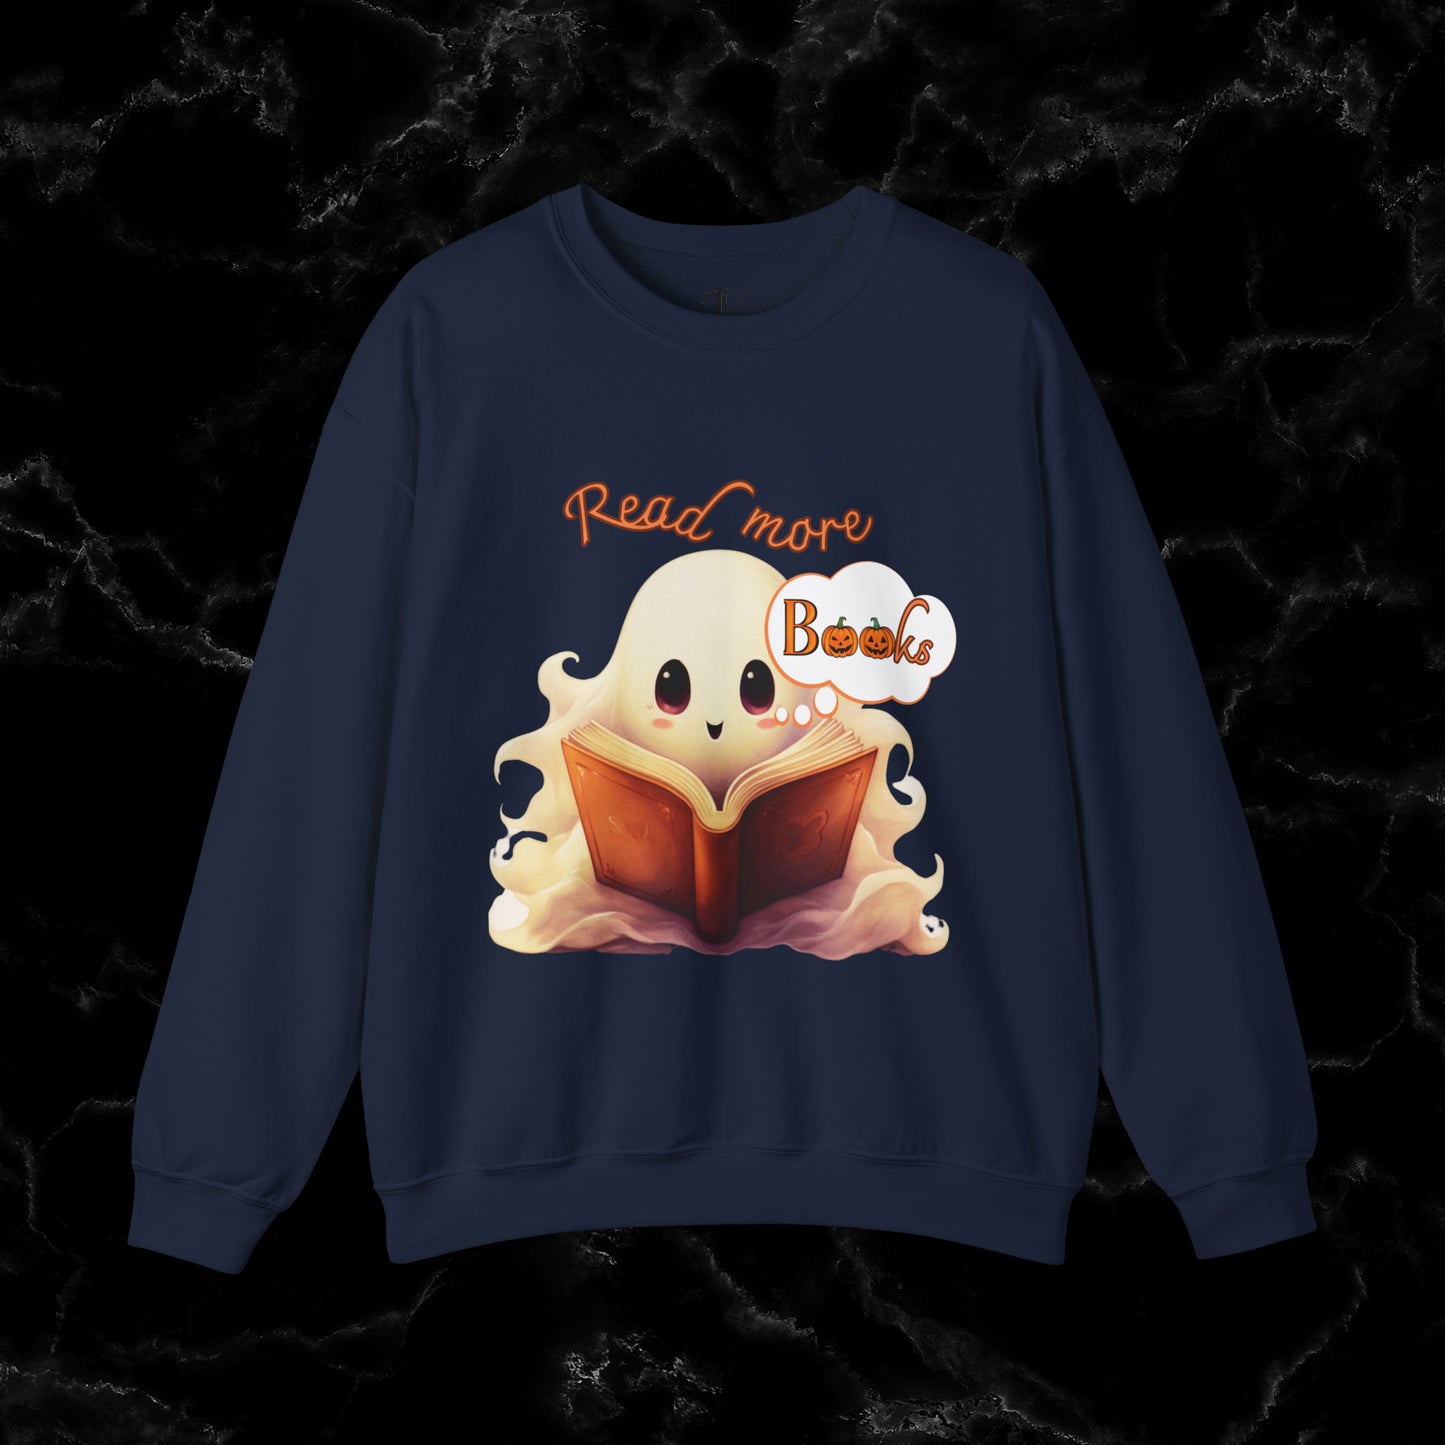 Read More Books Sweatshirt - Book Lover Halloween Sweater for Librarians and Students Sweatshirt S Navy 